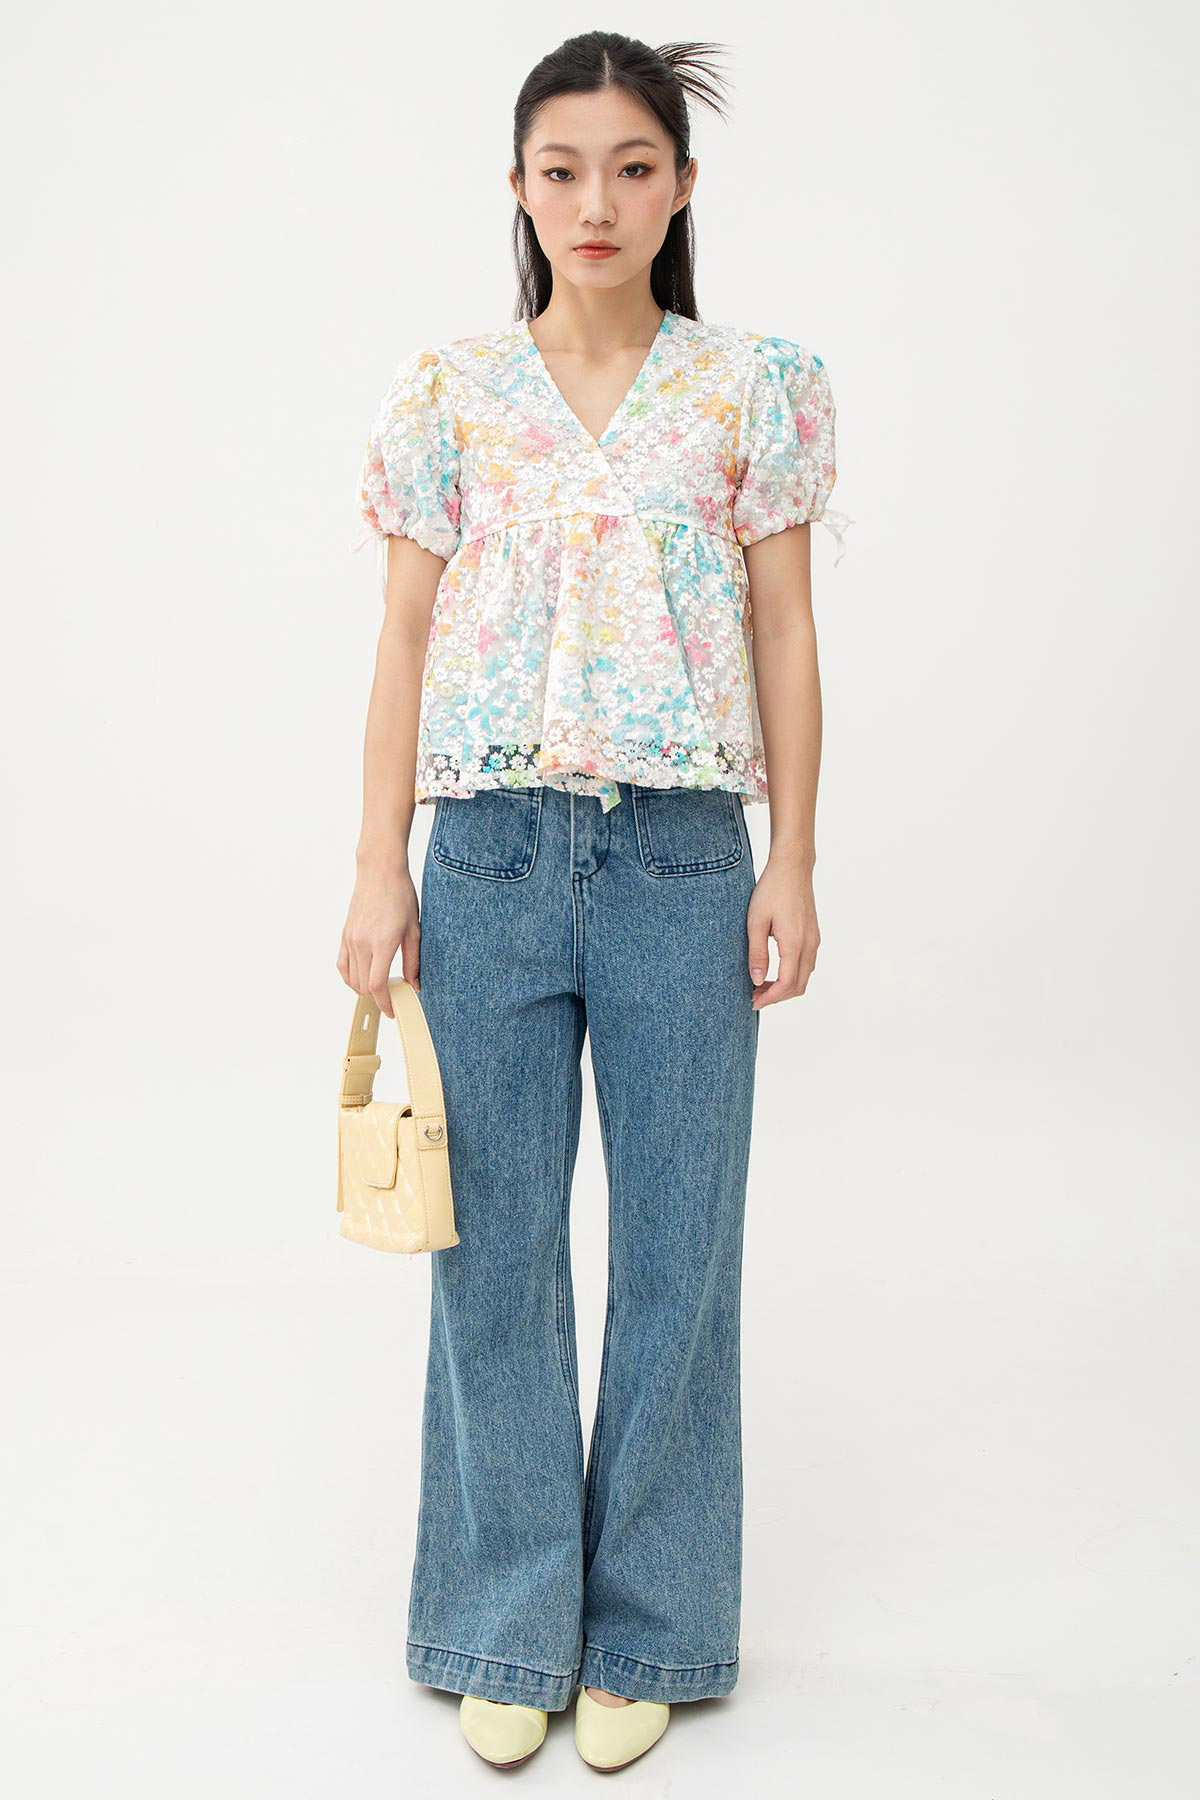 *BO* LOWE TOP - SOFT BLOOM [BY MODPARADE]